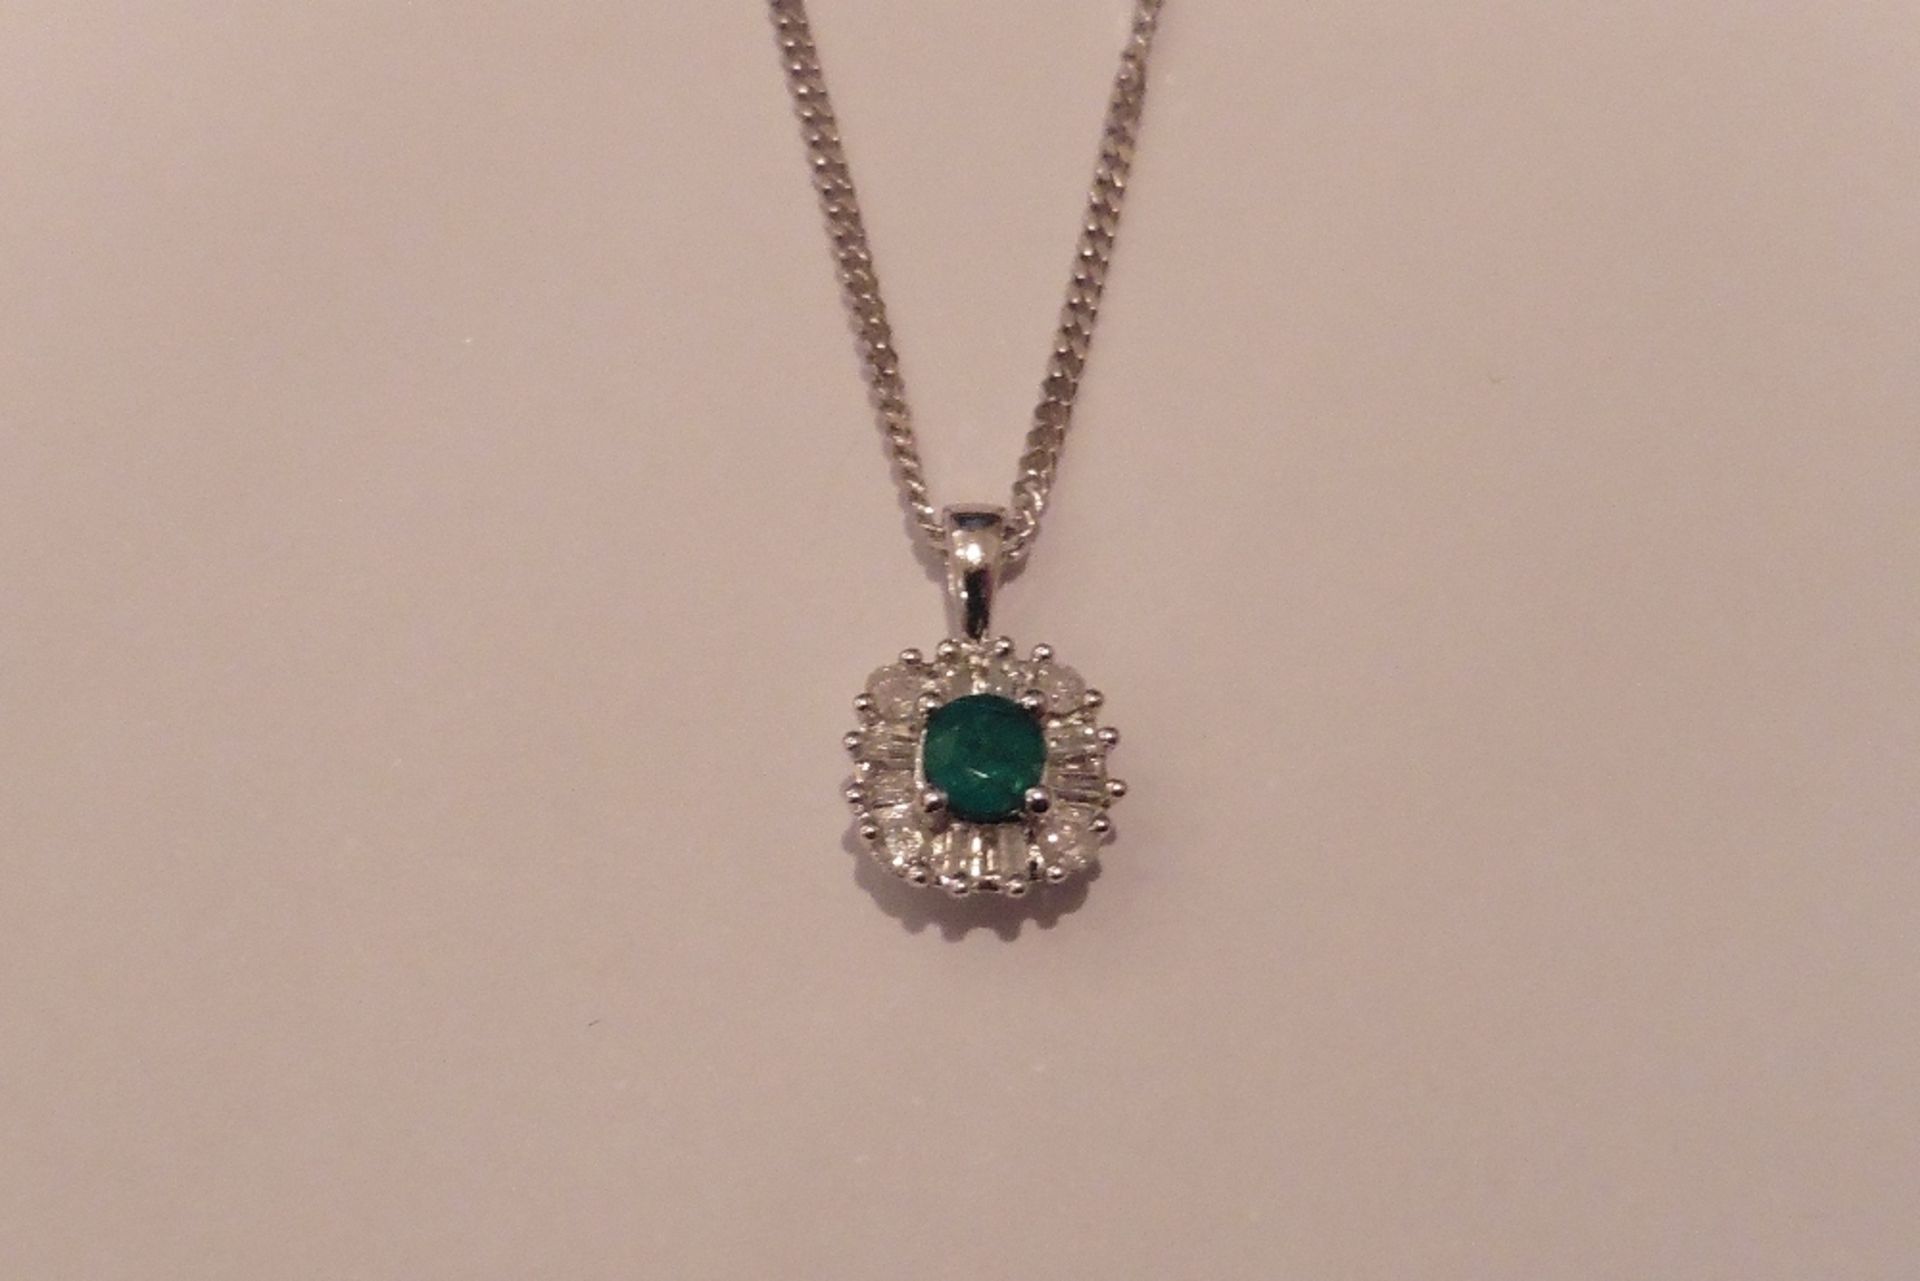 9ct white gold emerald and diamond pendant set with a round cut emerald which is surrounded with tap